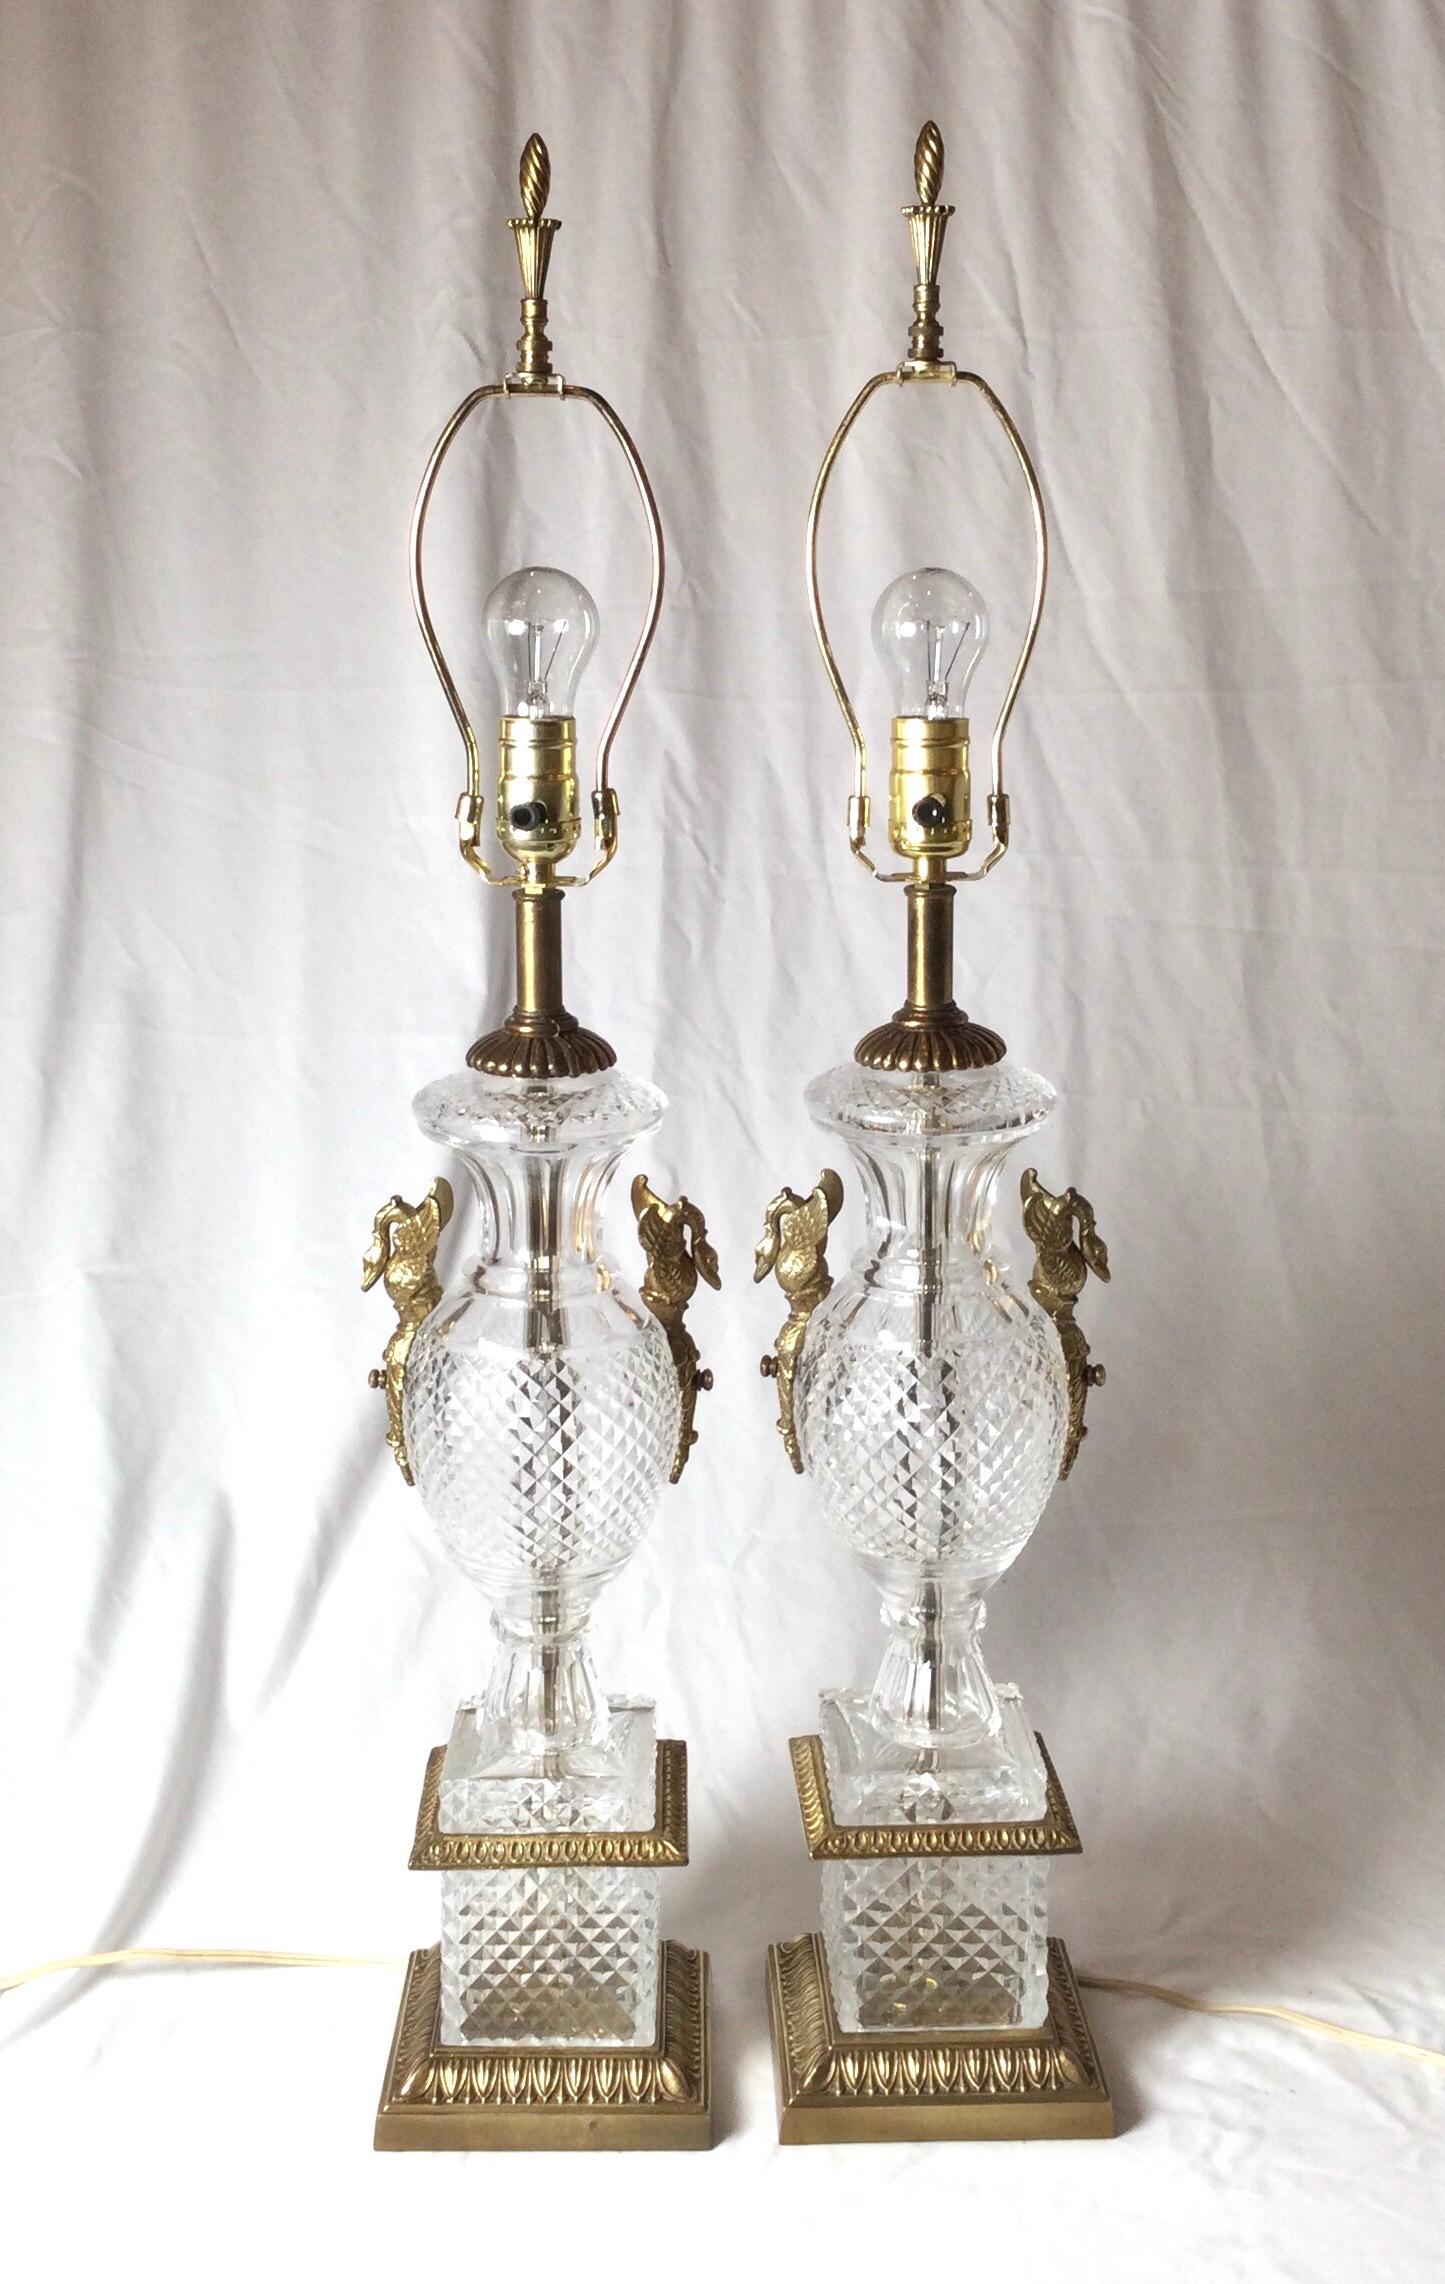 Elegant pair of diamond cut crystal neoclassical shaped lamps. The all-over diamond cut pattern with gilt cast brass mounts with swan motif. The shades are for photographic purposes only and not included with the lamps. 33 inches tall to the top of